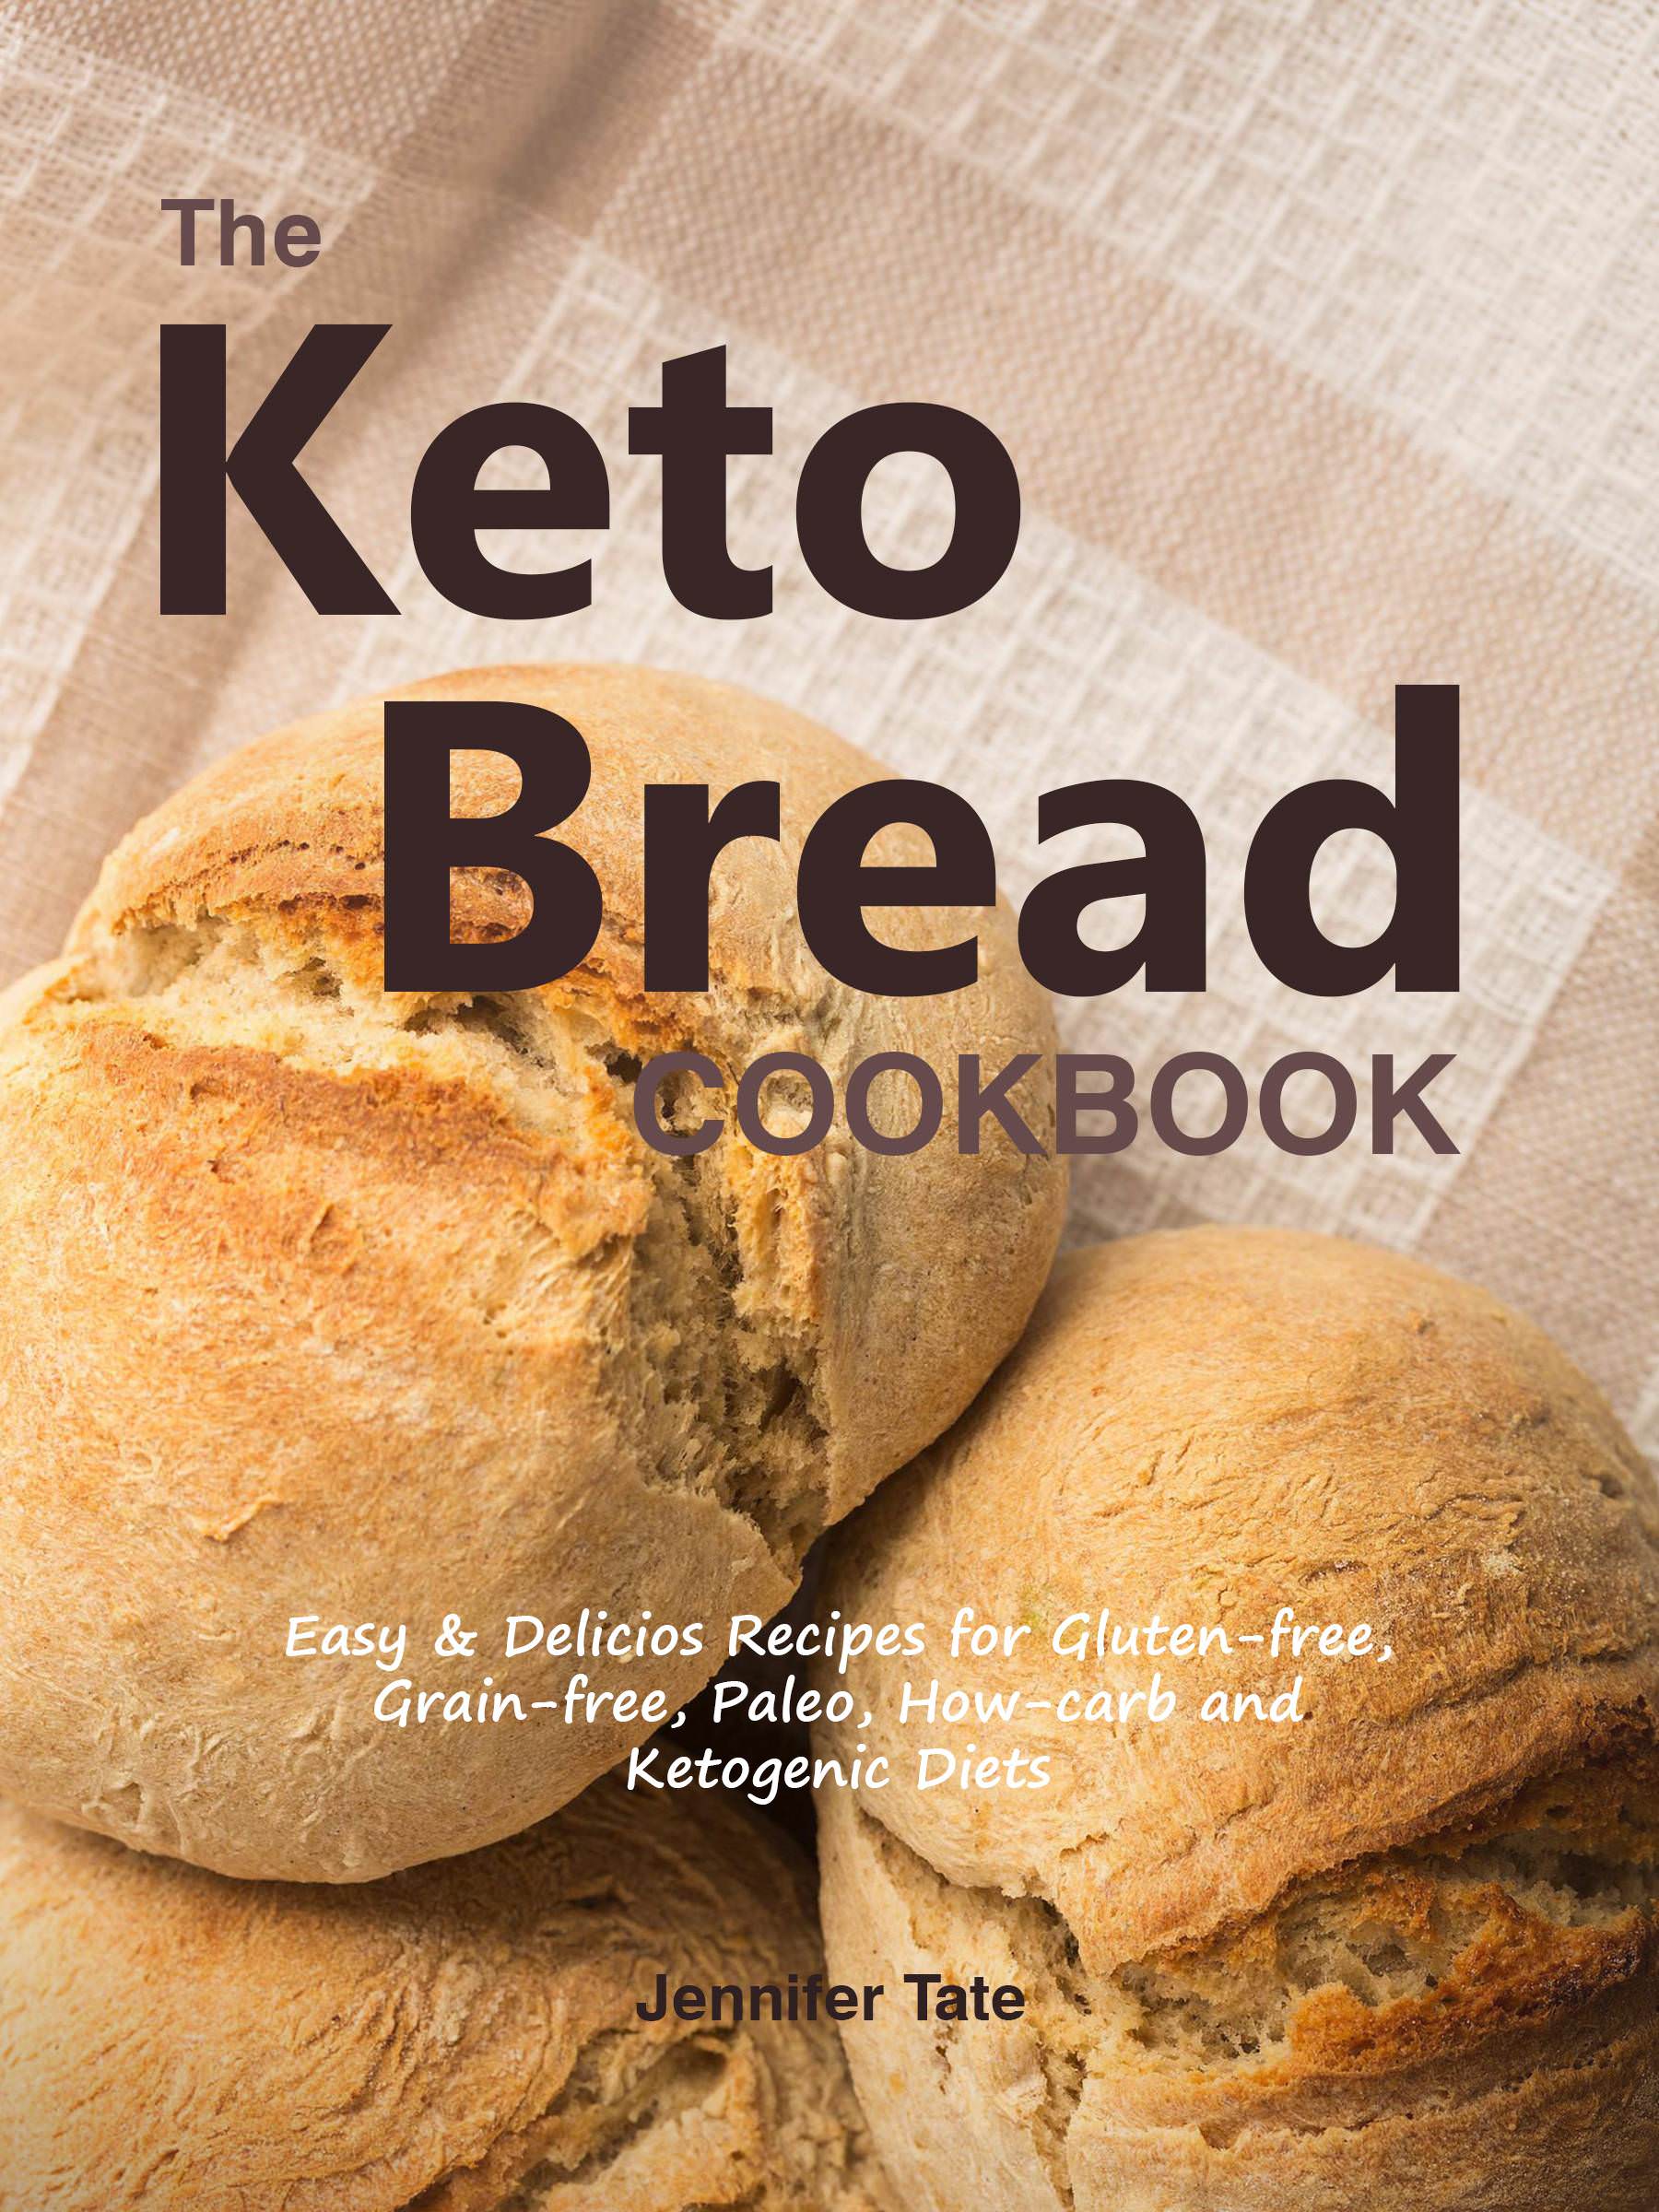 FREE: Keto Bread Cookbook: Easy & Delicious Recipes for Gluten-Free, Grain-Free, Paleo, Low-Carb and Ketogenic Diets by Jennifer Tate